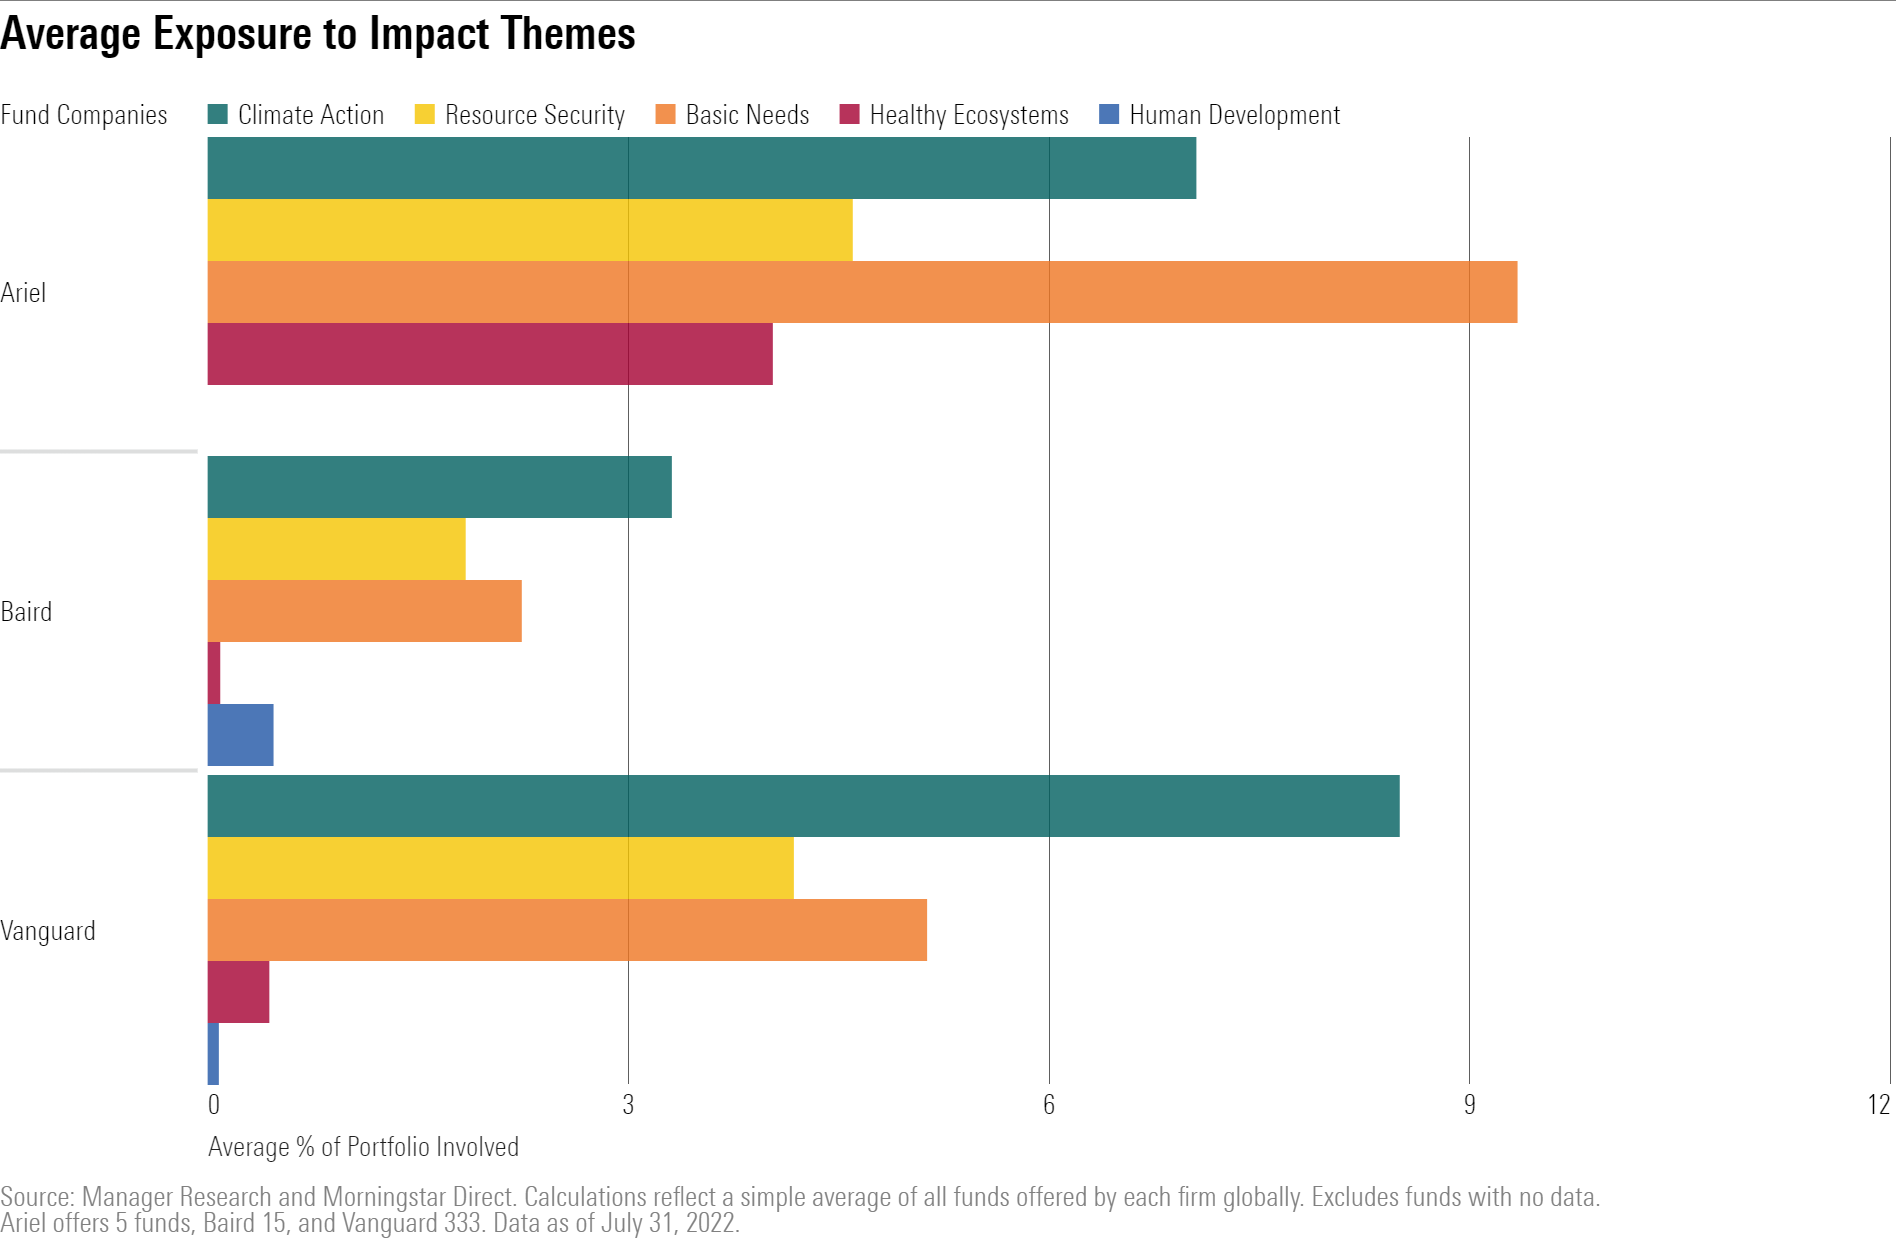 A bar chart of Ariel, Baird, and Vanguard's exposures to impact themes.